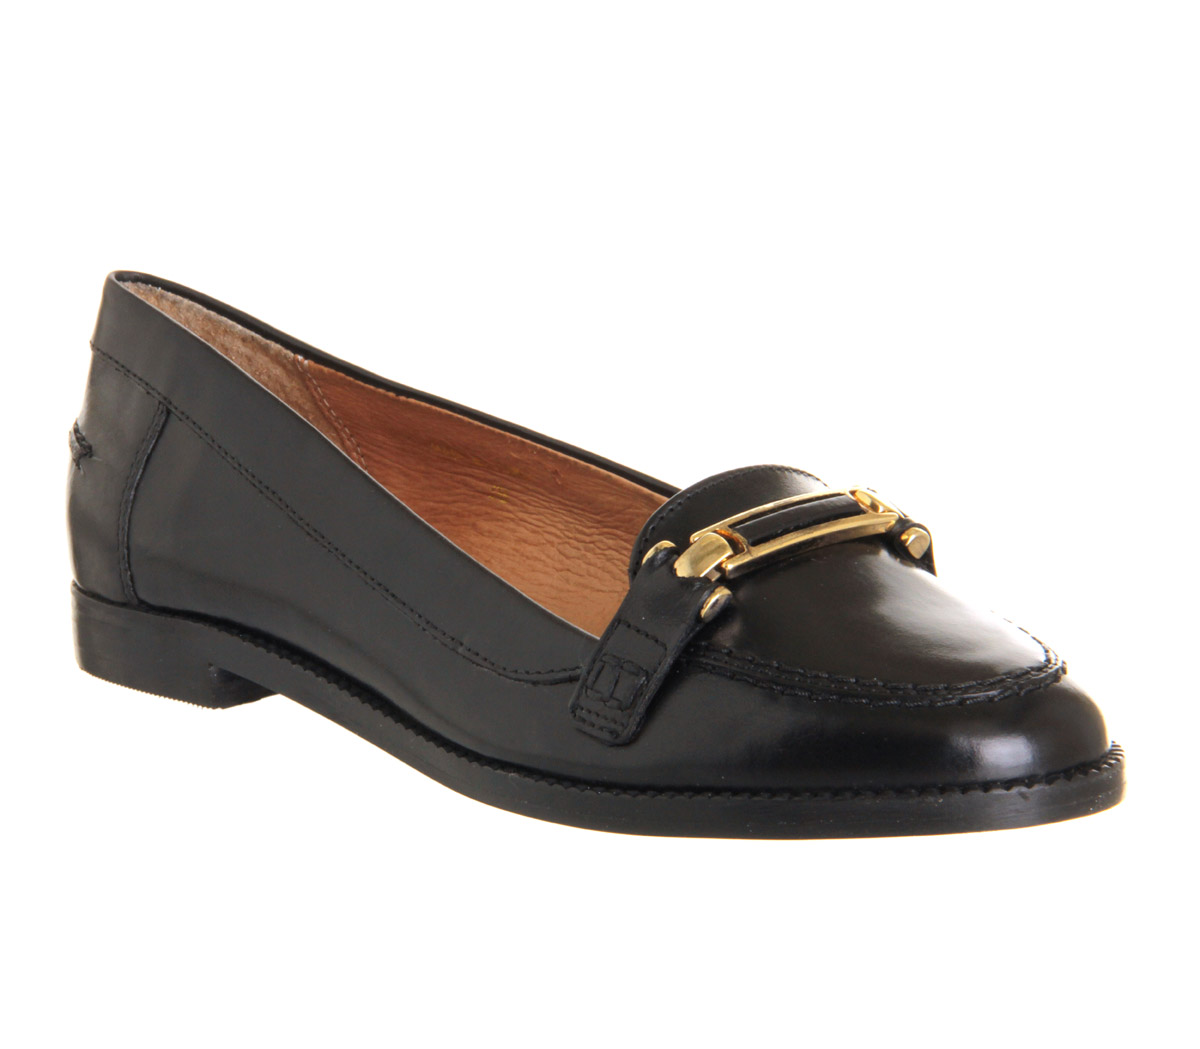 OFFICEVictoria loafersBlack Leather